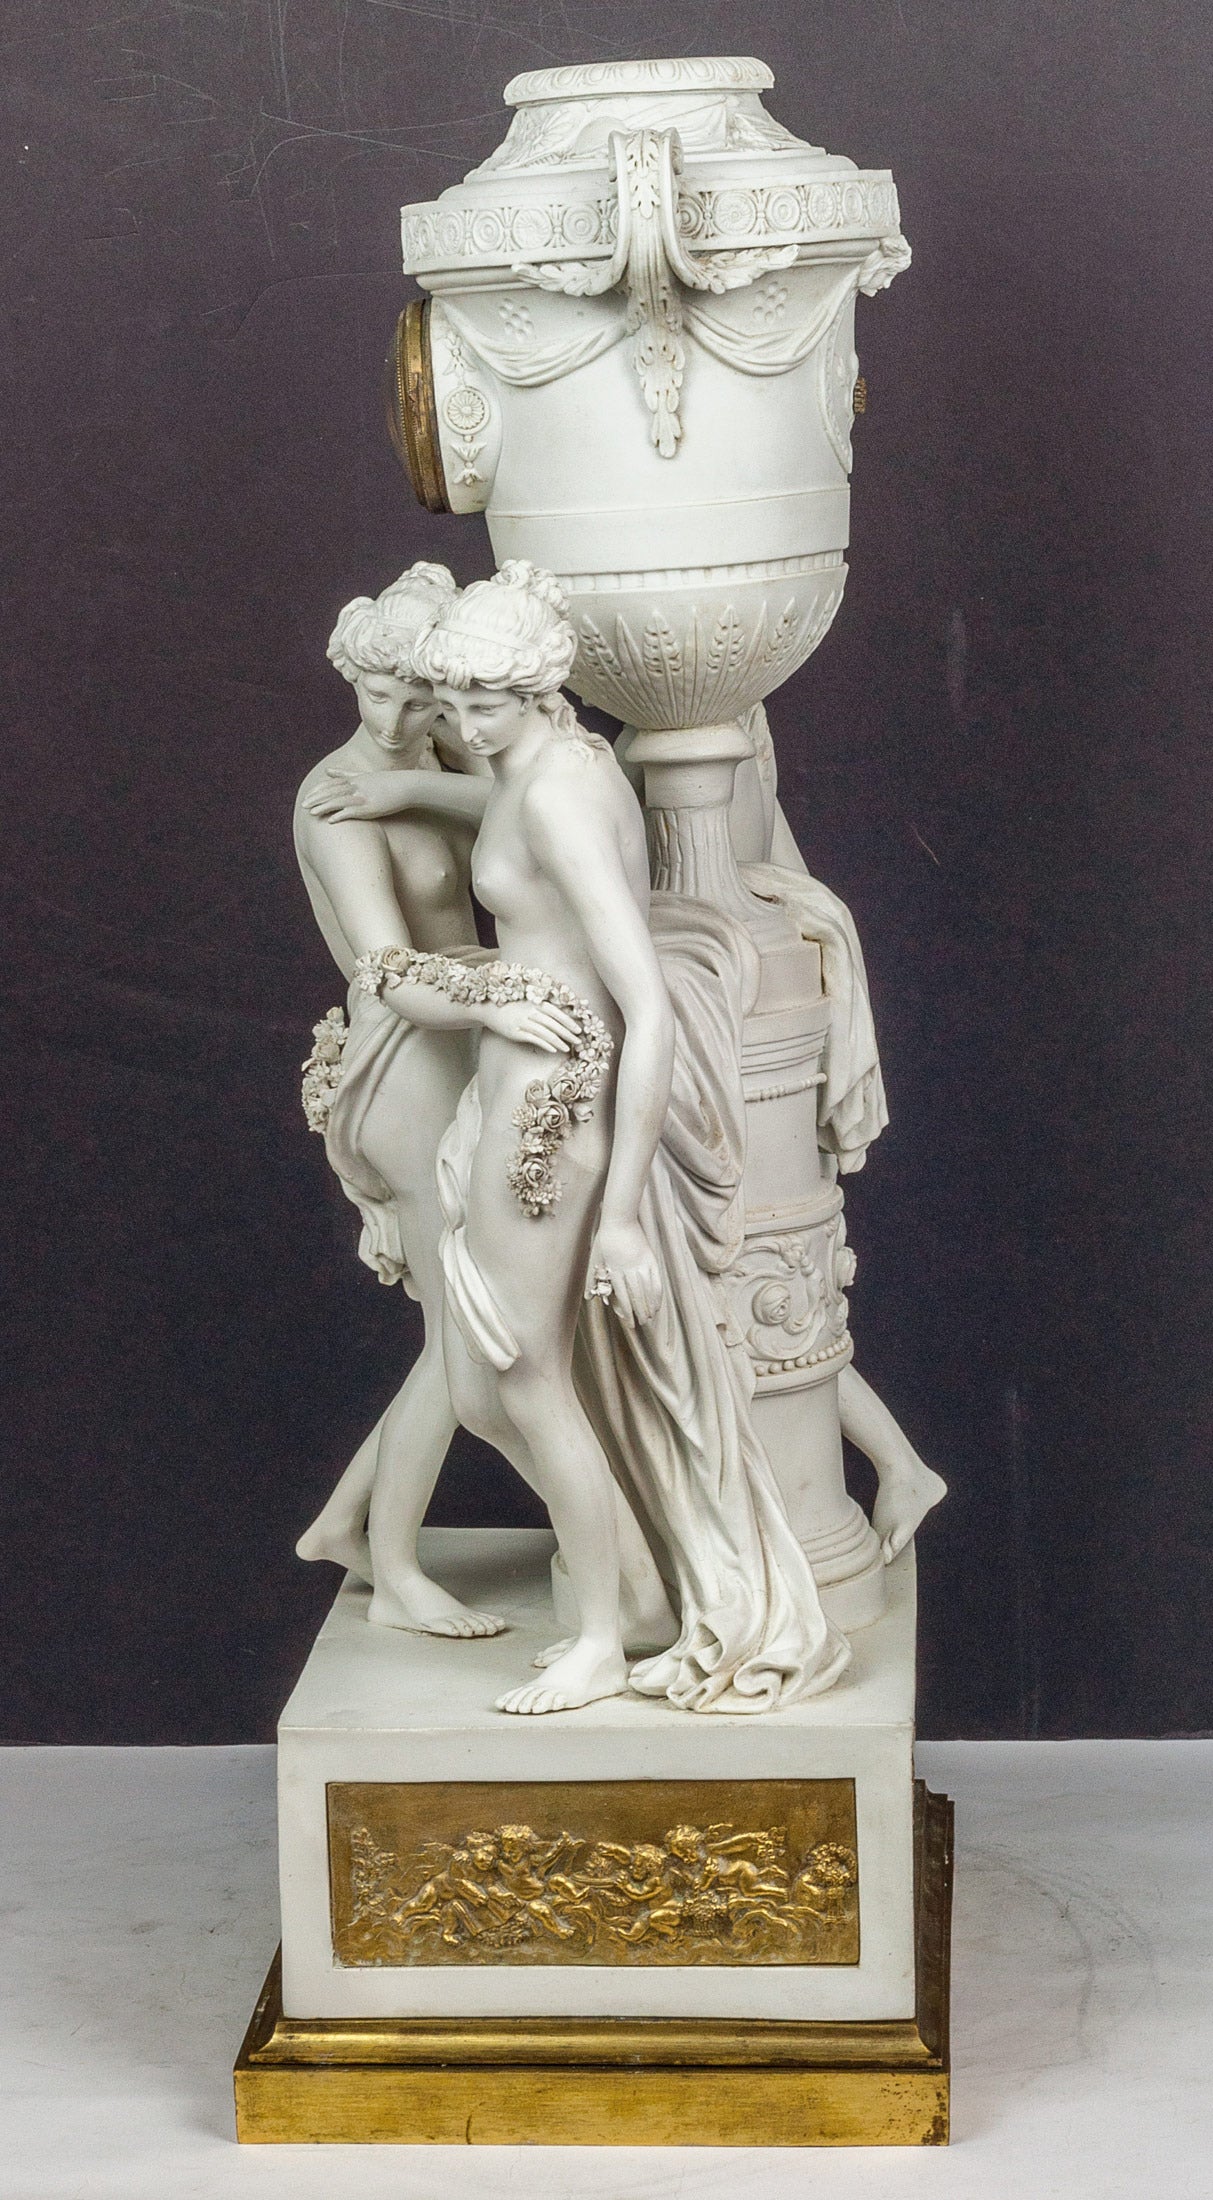 19th Century Neoclassical French Bisque Porcelain Figural Mantel Clock with Nude Figures